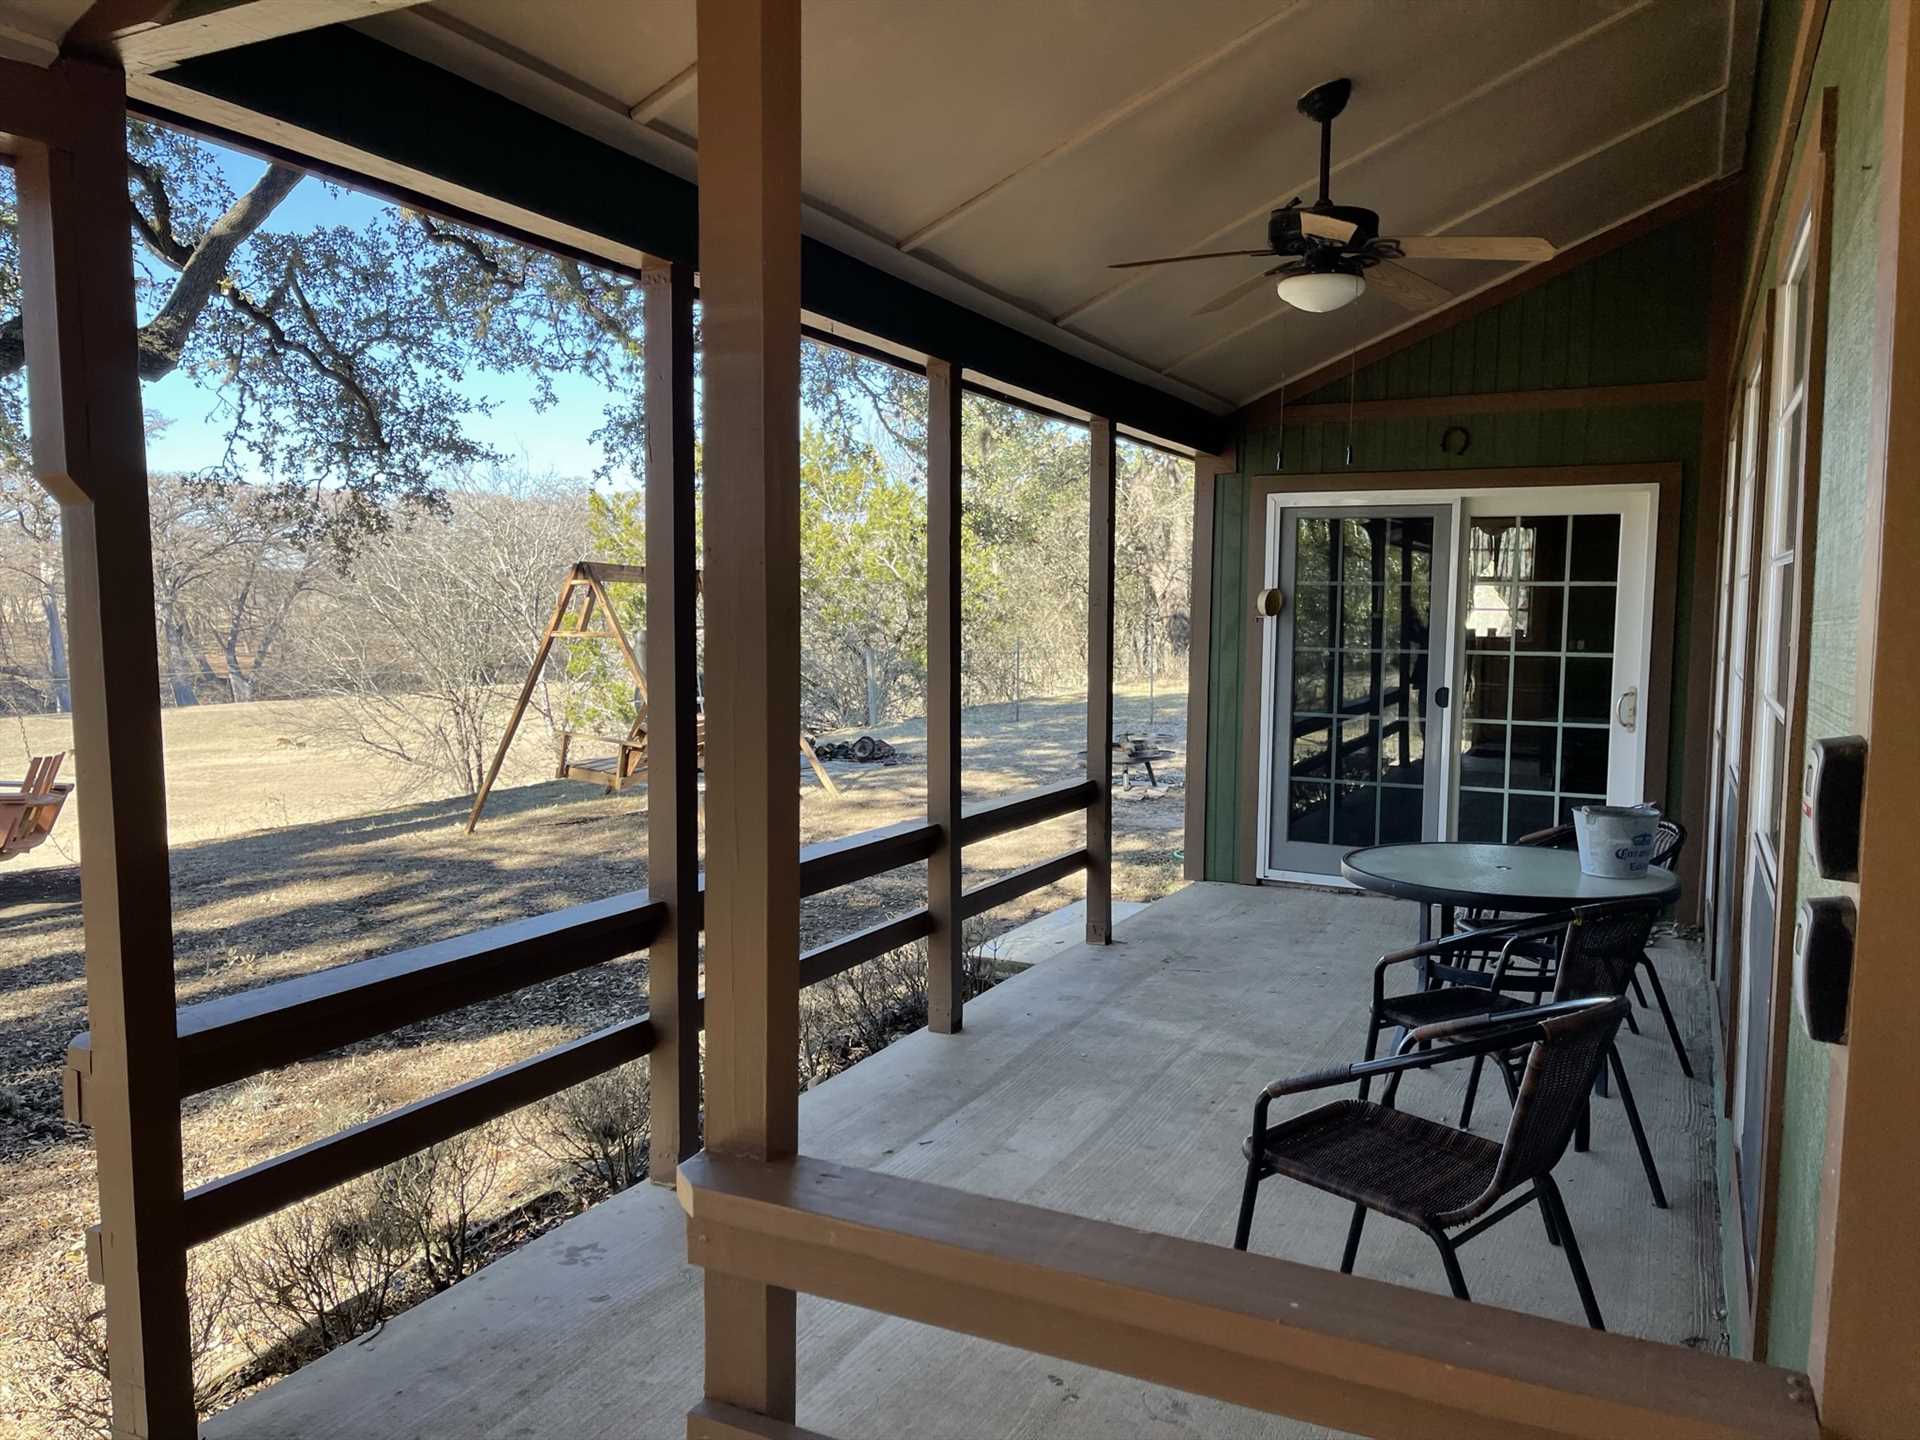                                                 Porch swings and the shaded deck face the river, creating an intimate and peaceful setting.